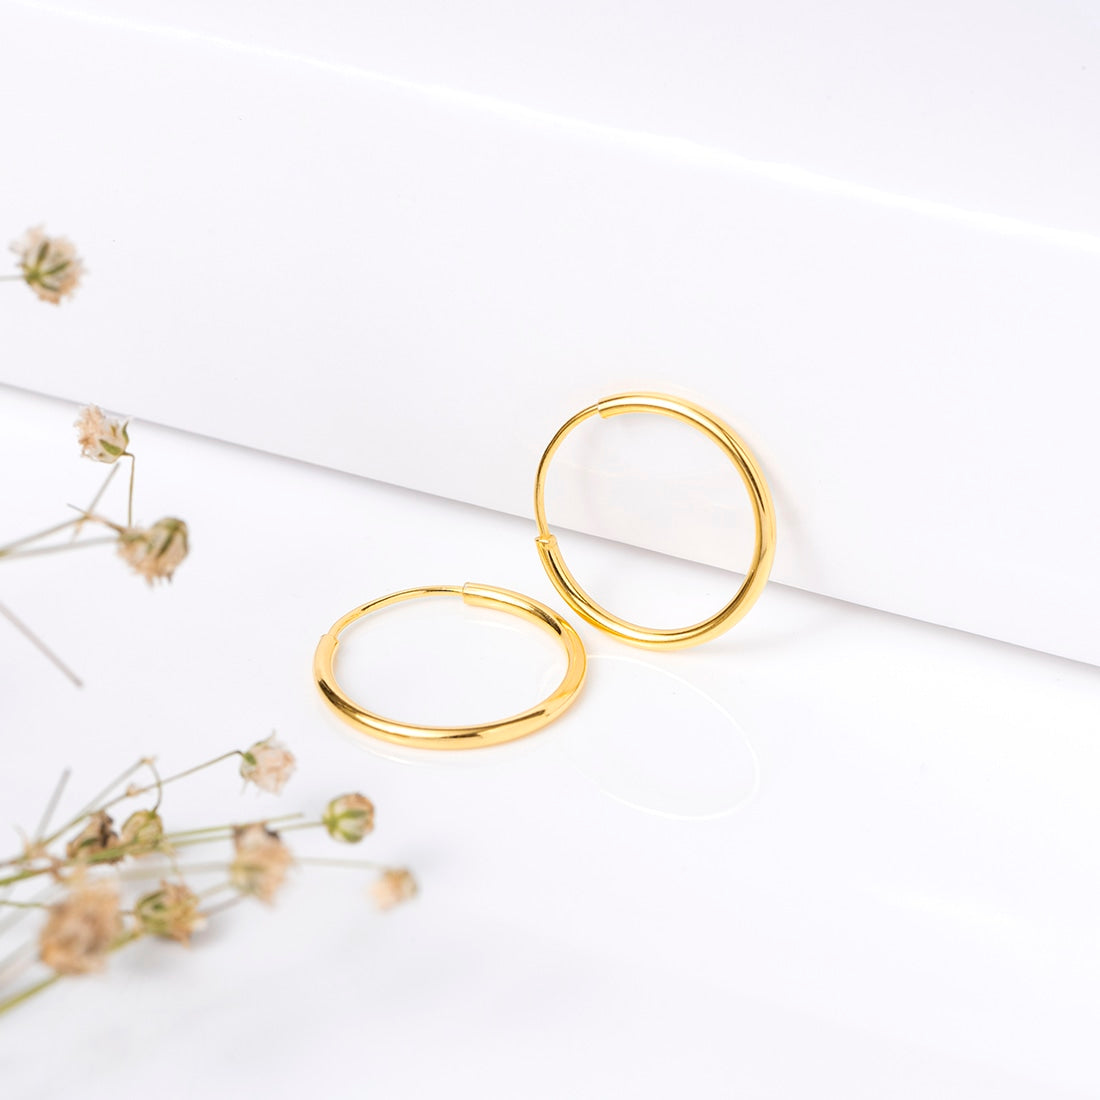 Gold Plated Round 925 Sterling Silver Hoops